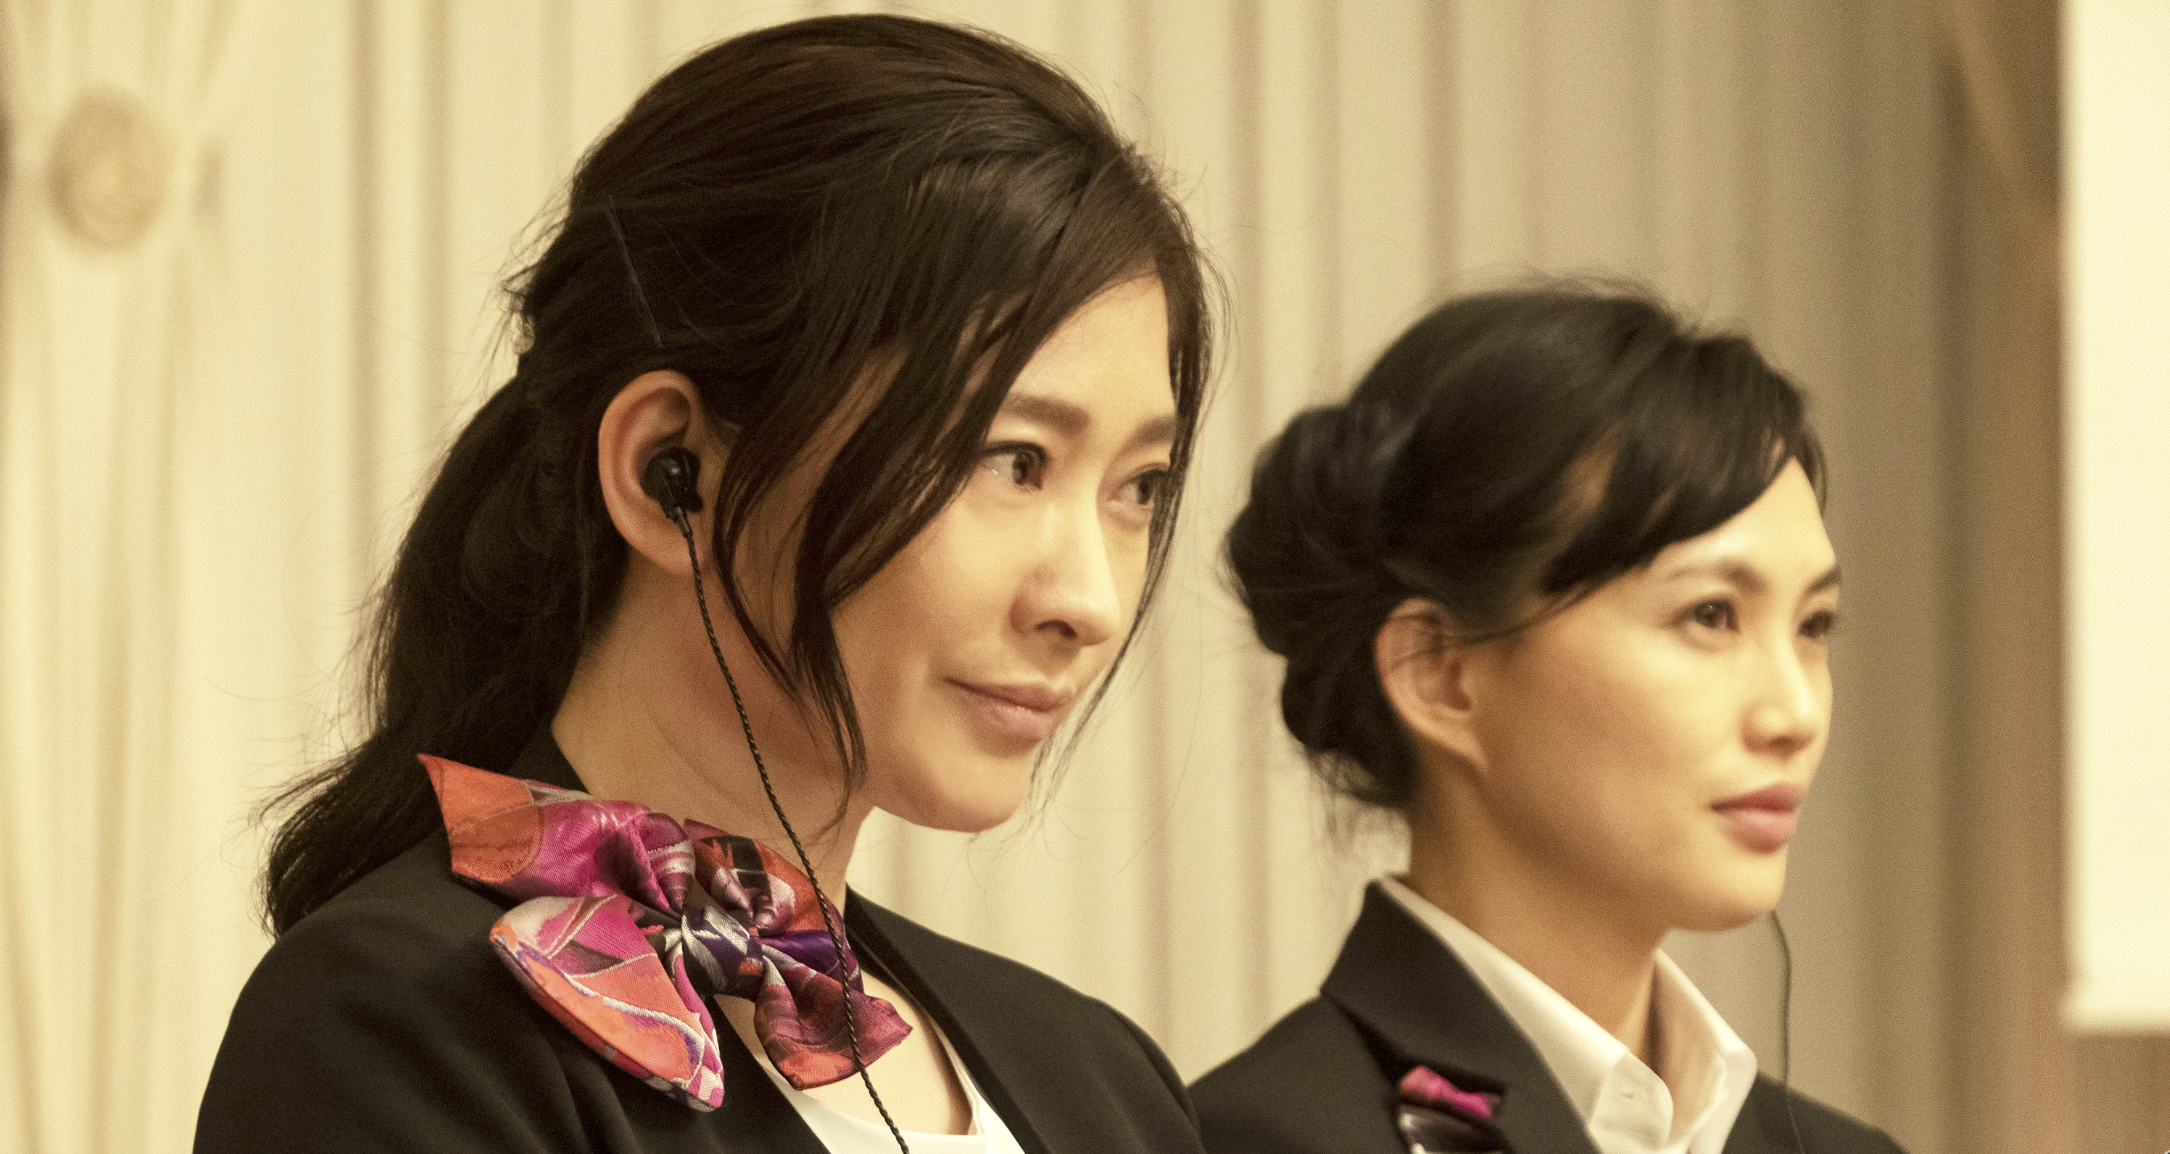 The ACA Cinema Project Announces Series Showcasing Women Filmmakers From Japan